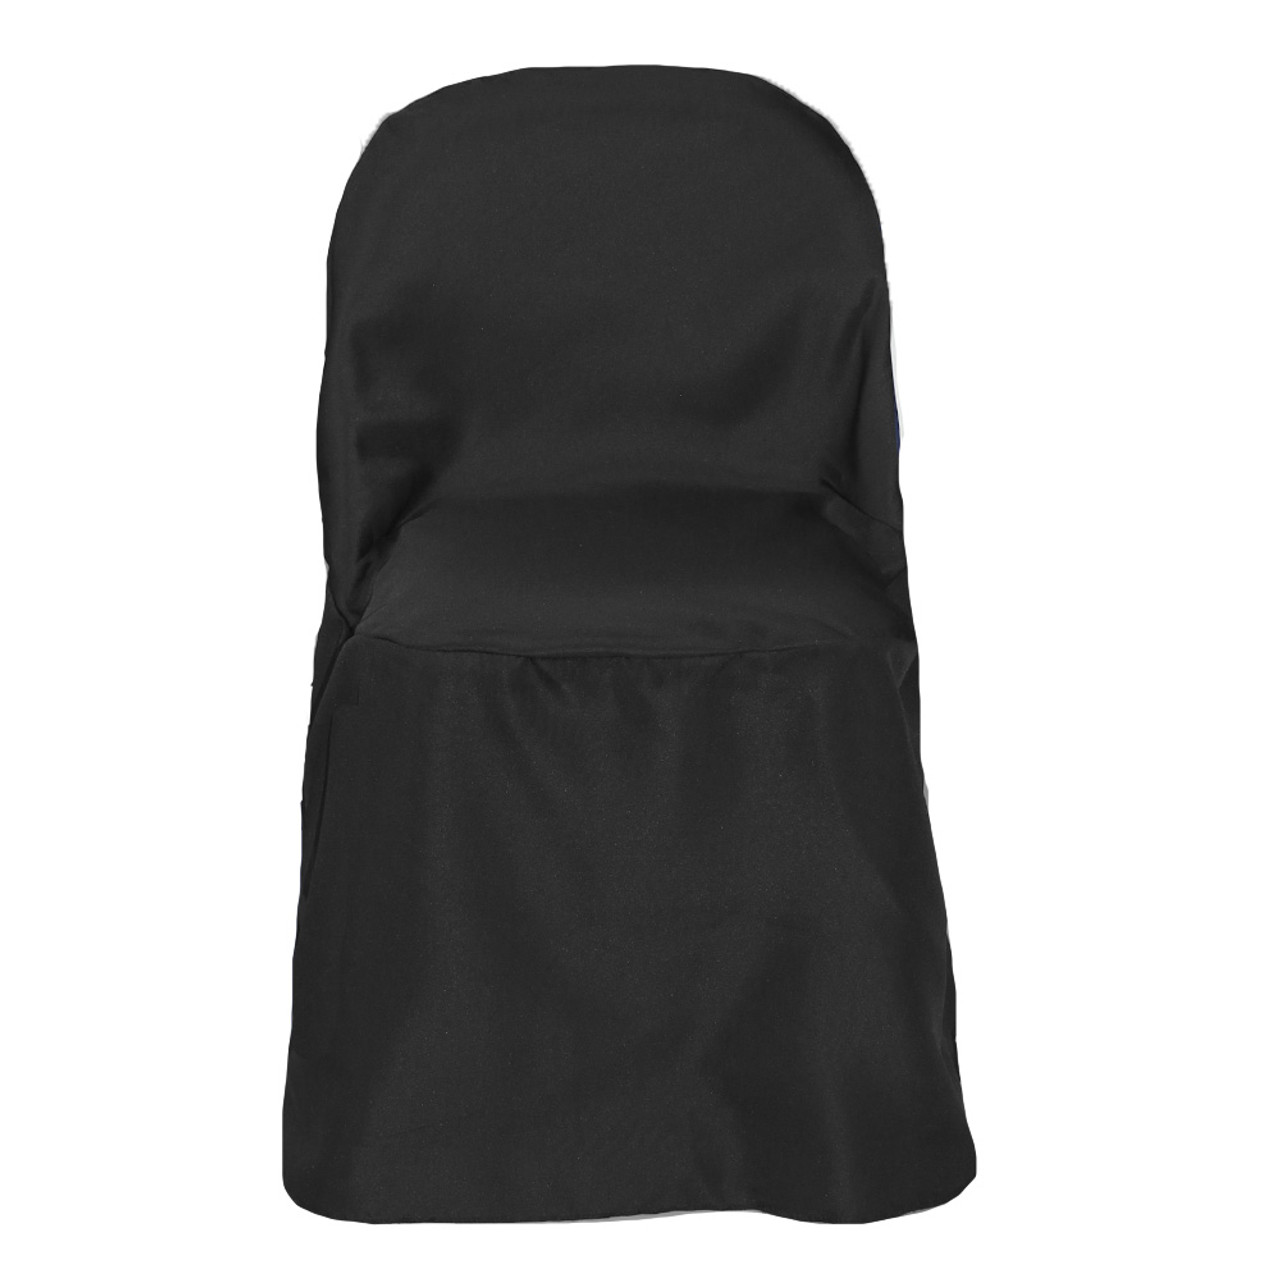 Black Polyester Banquet Chair Covers